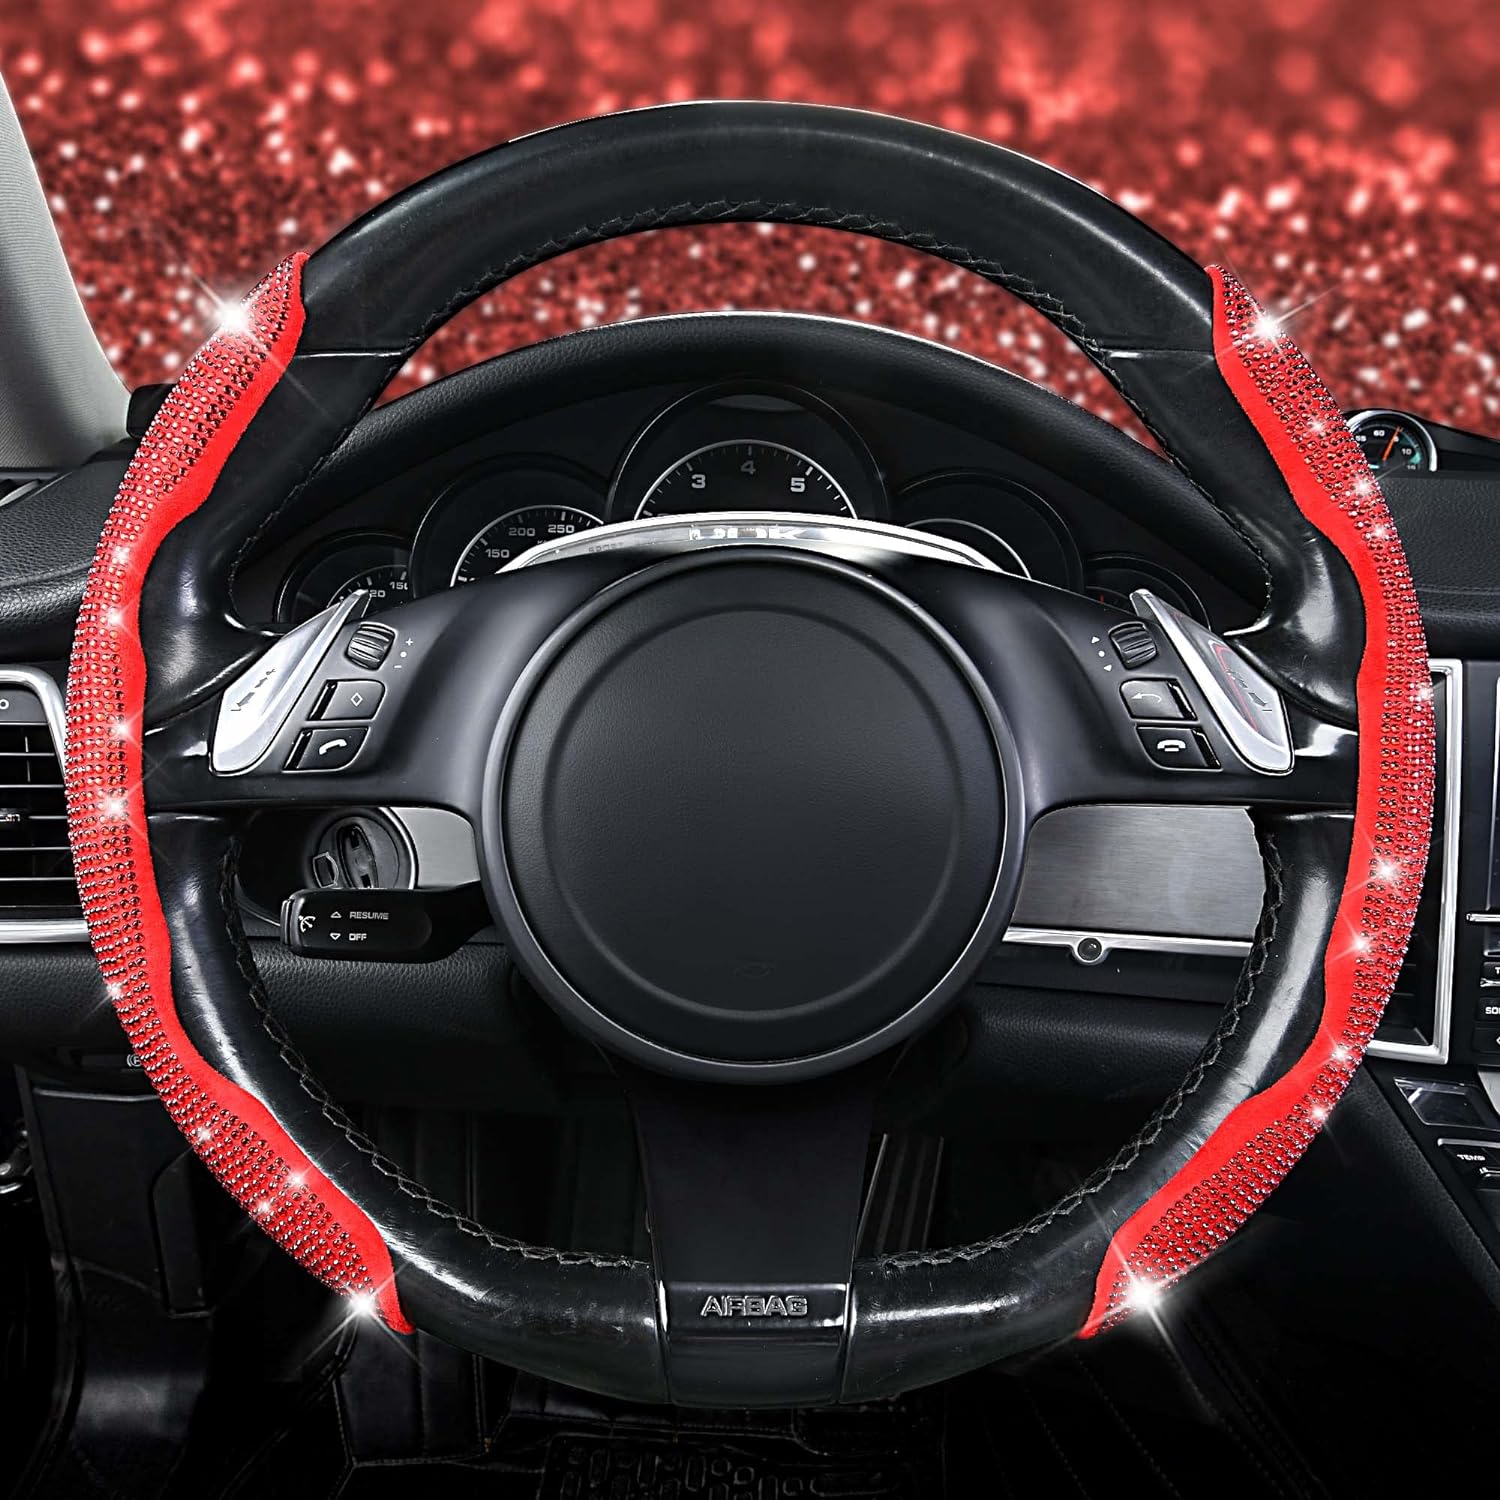 CAR PASS Bling Diamond Steering Wheel Cover with Crystal Rhinestones, Segmented Wheel Protector Non-Slip Cute Car Accessories Universal Fit D-Shape O-Shape 14.5